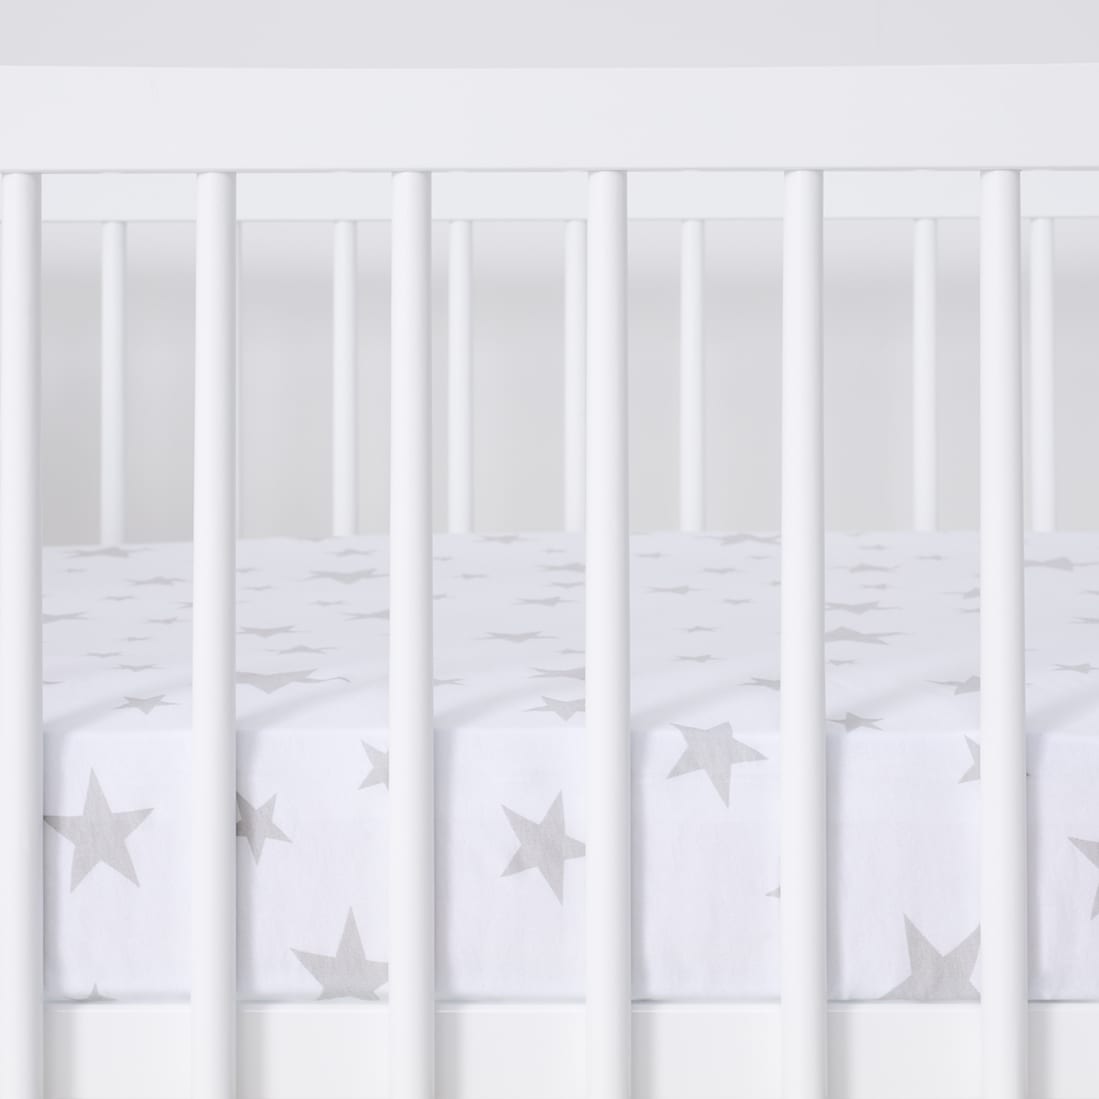 Snuz Cotbed Sheets Stars - Pack of 2